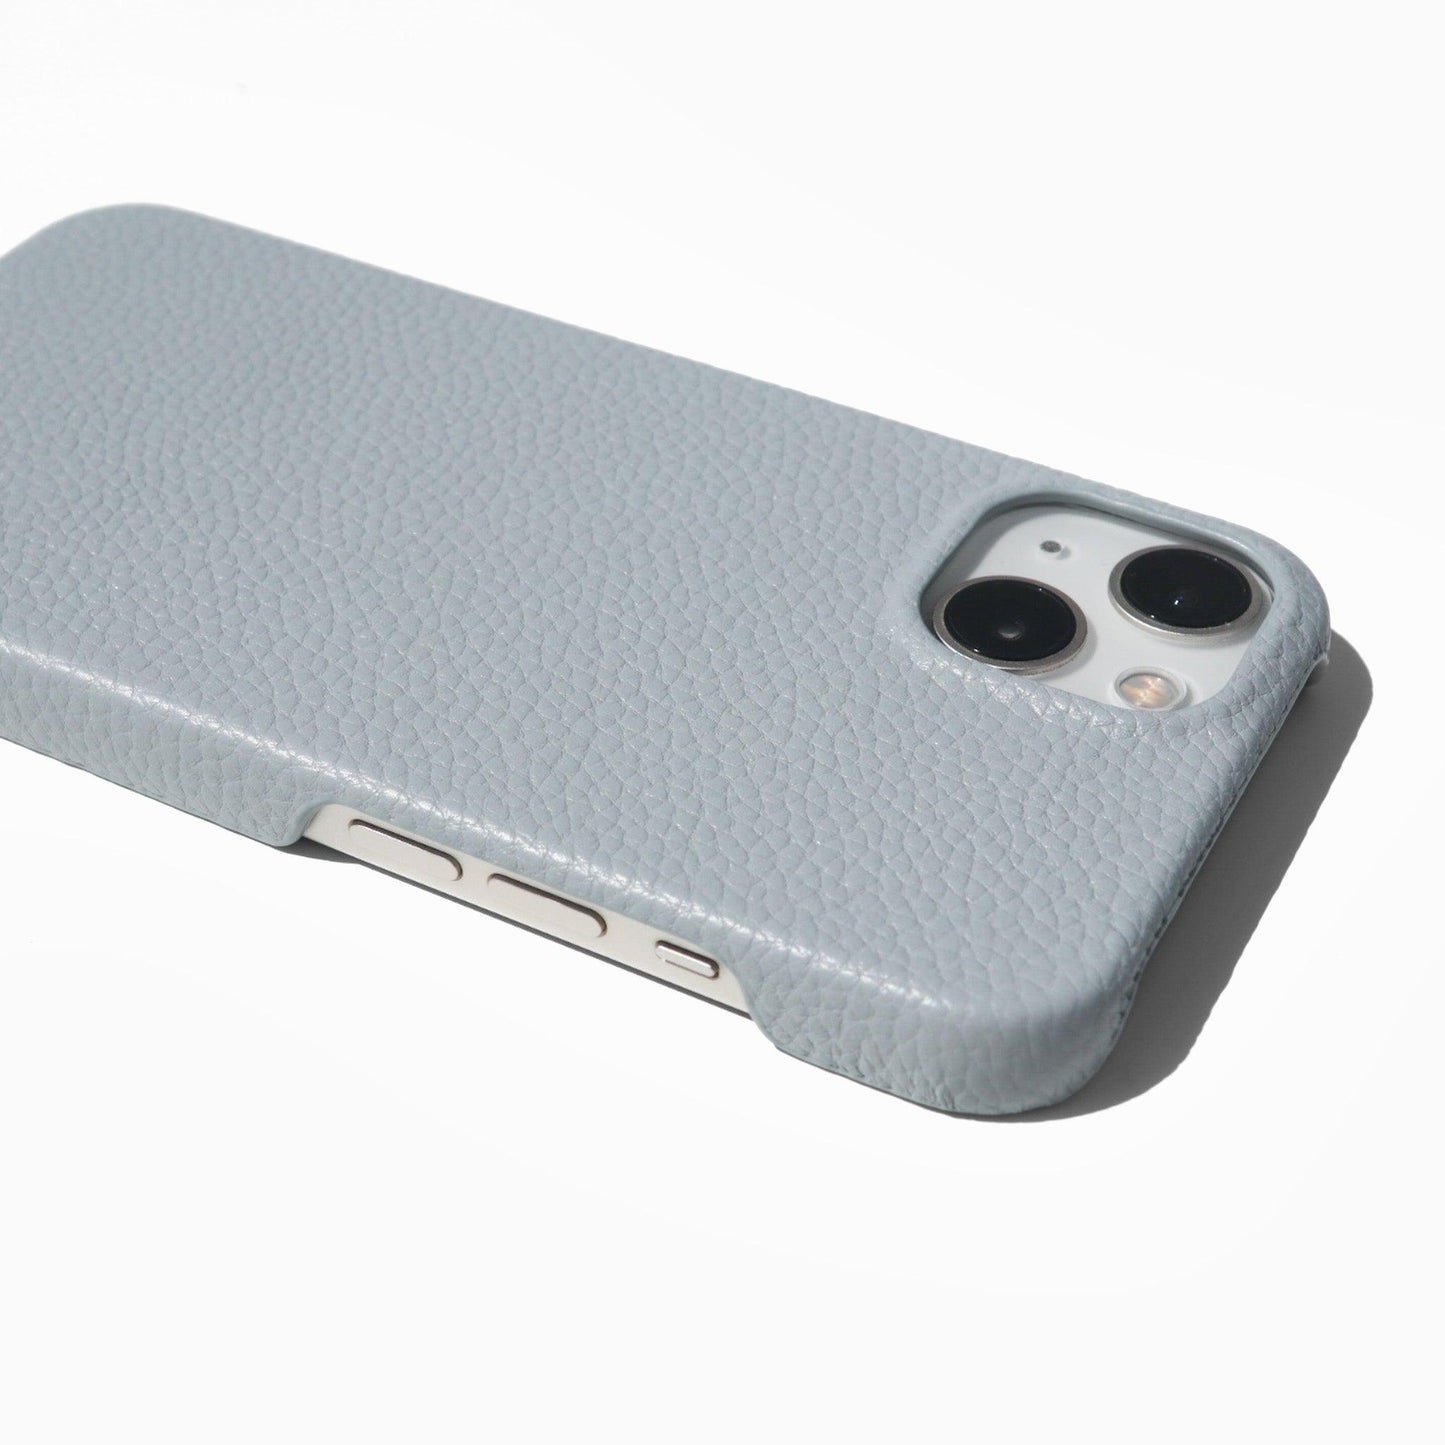 iPhone Thin Case - Dusty Blue